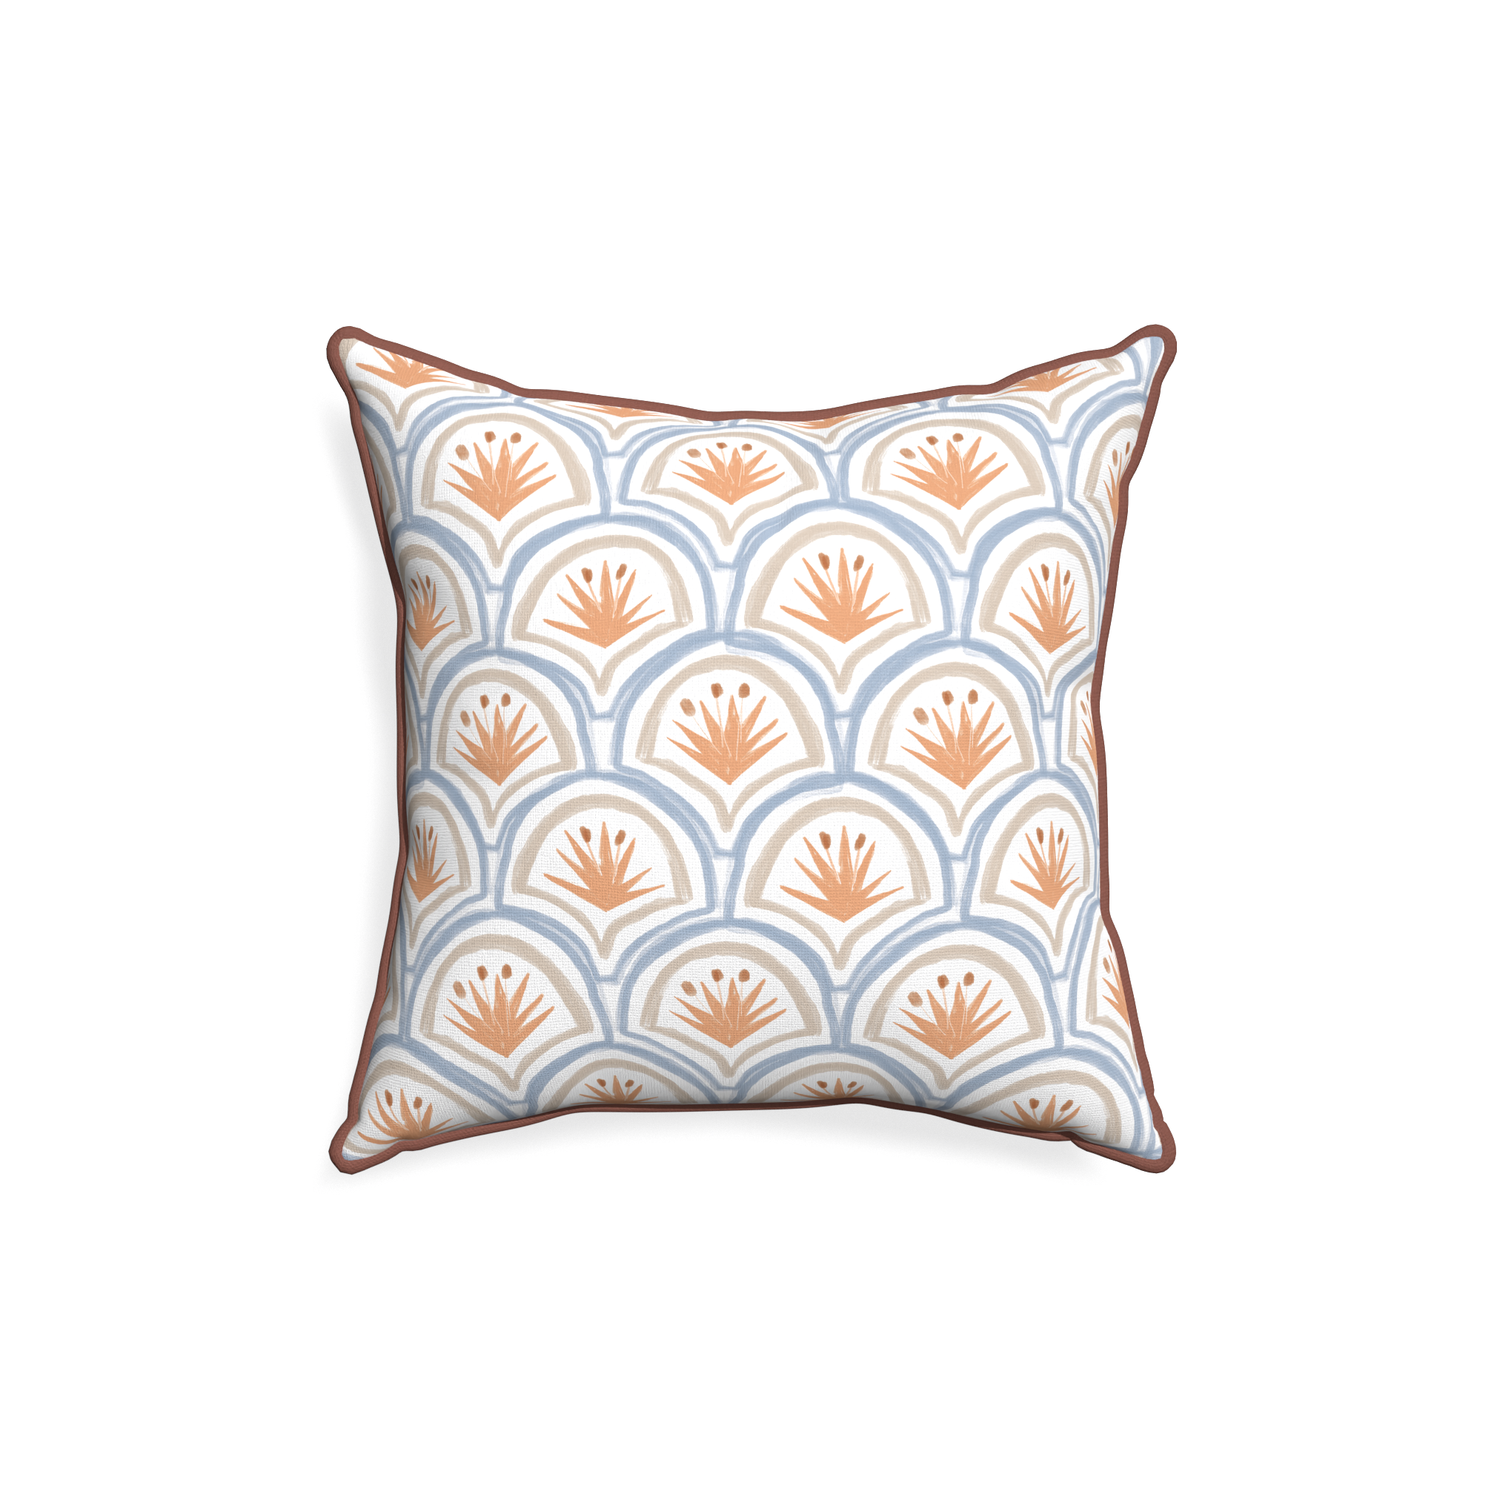 18-square thatcher apricot custom art deco palm patternpillow with w piping on white background